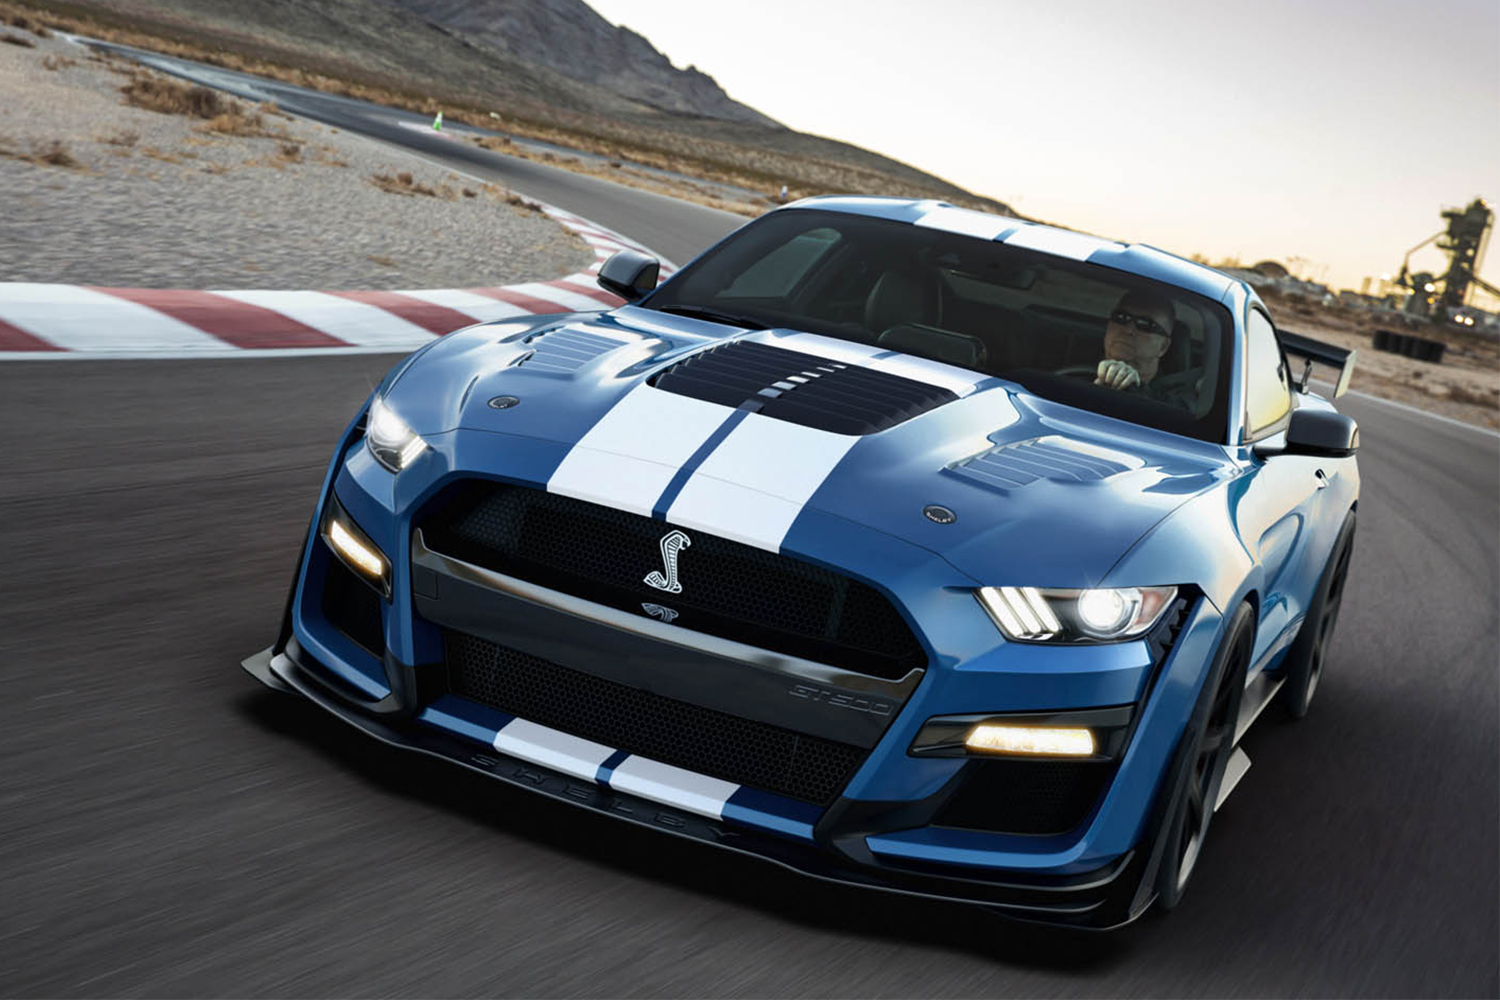 Shelby American Mustang GT500SE on a race track